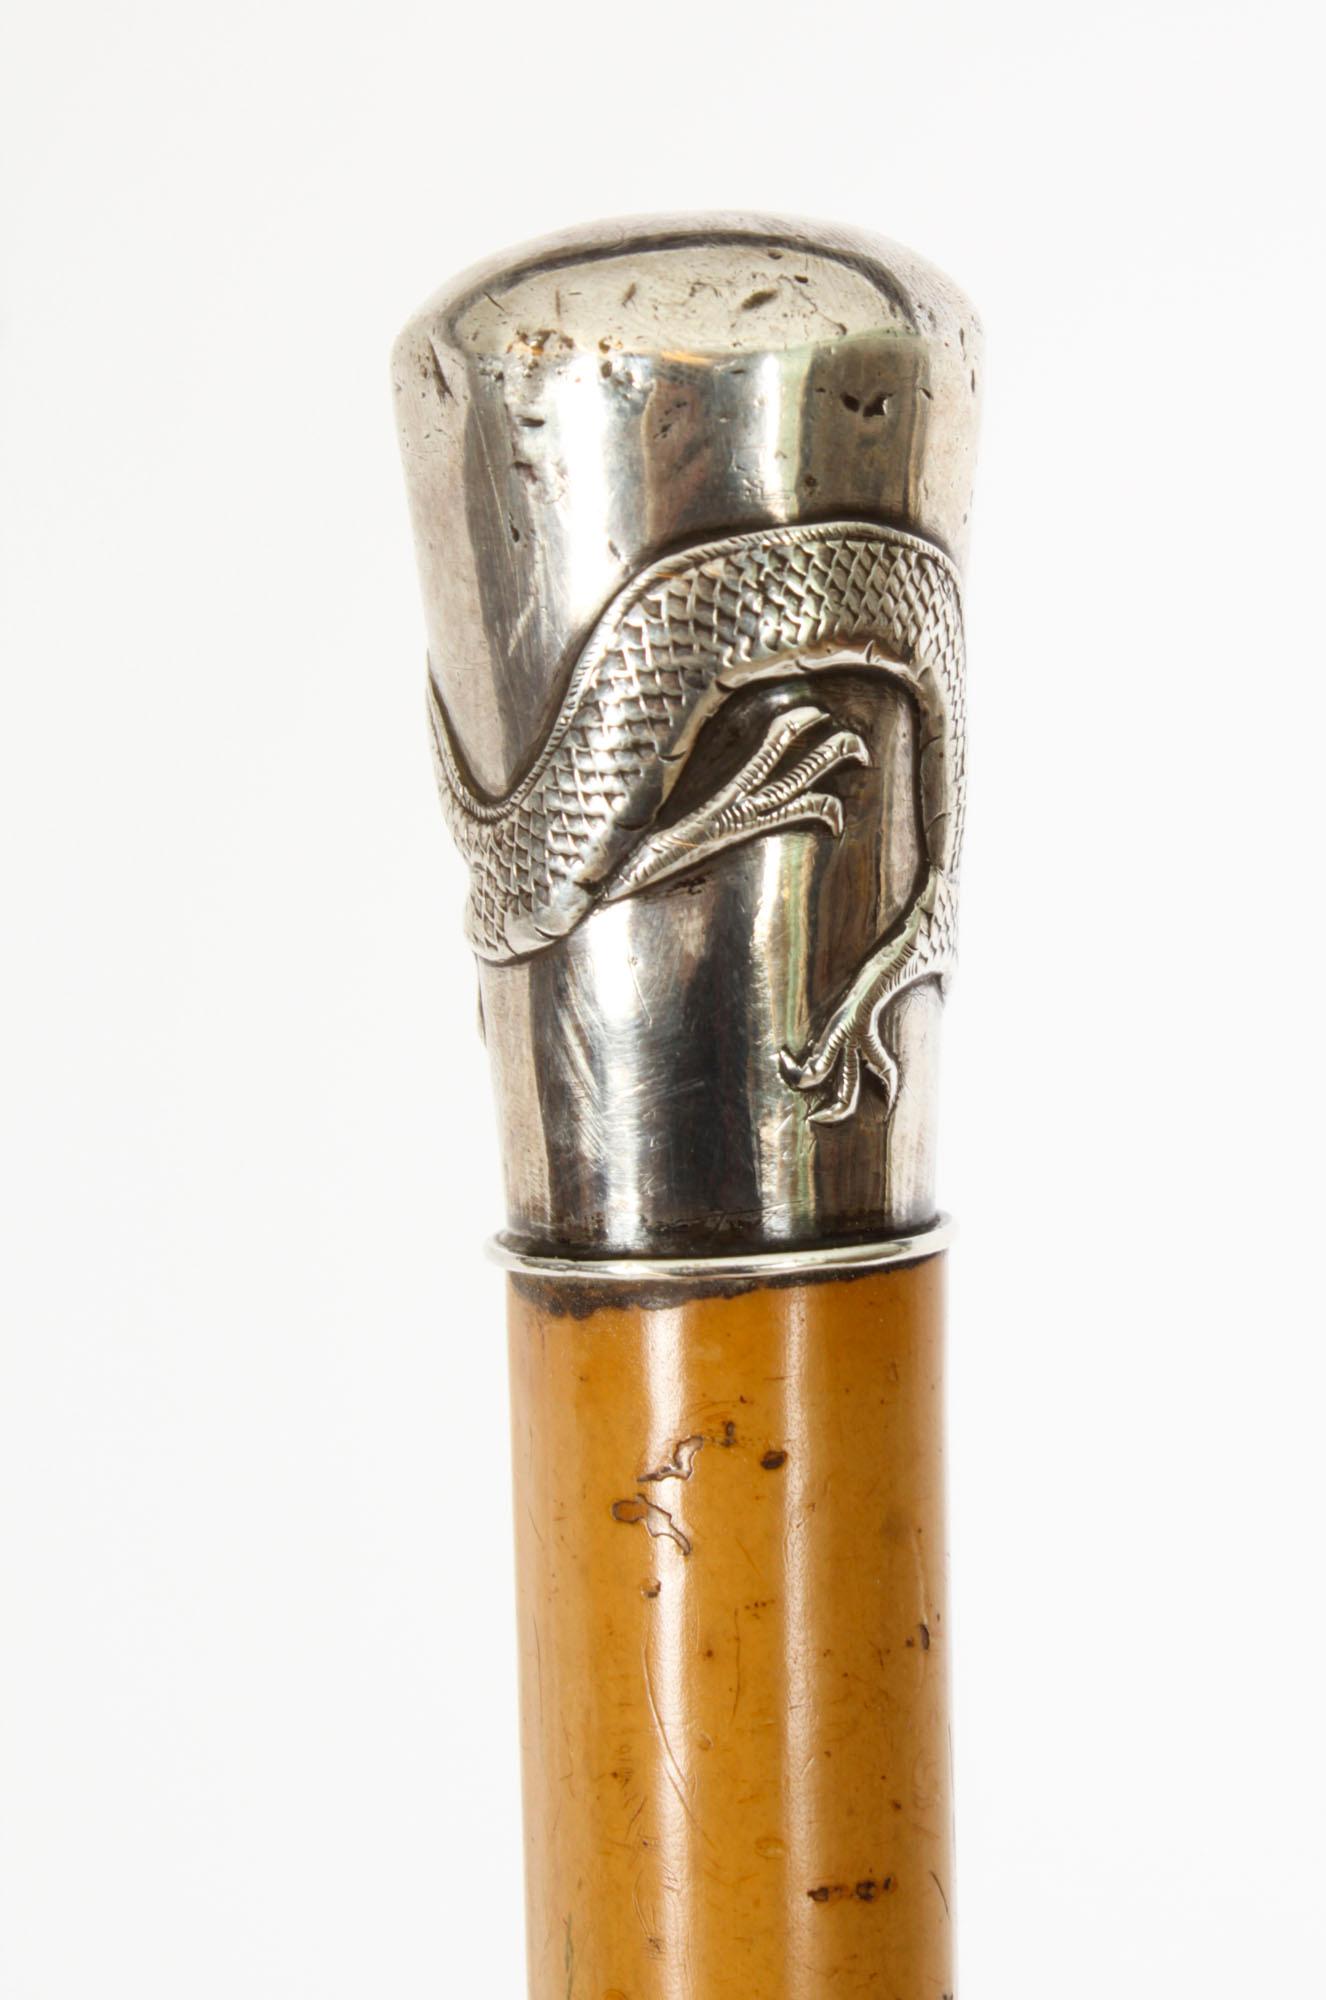 This is a beautiful antique Chinese gentleman's silver pommel and Malacca walking stick, circa 1880 in date.
 
This decorative walking cane features an exquisite Chinese silver pommel decorated with exquisitely cast dragon. 
 
The attractive and